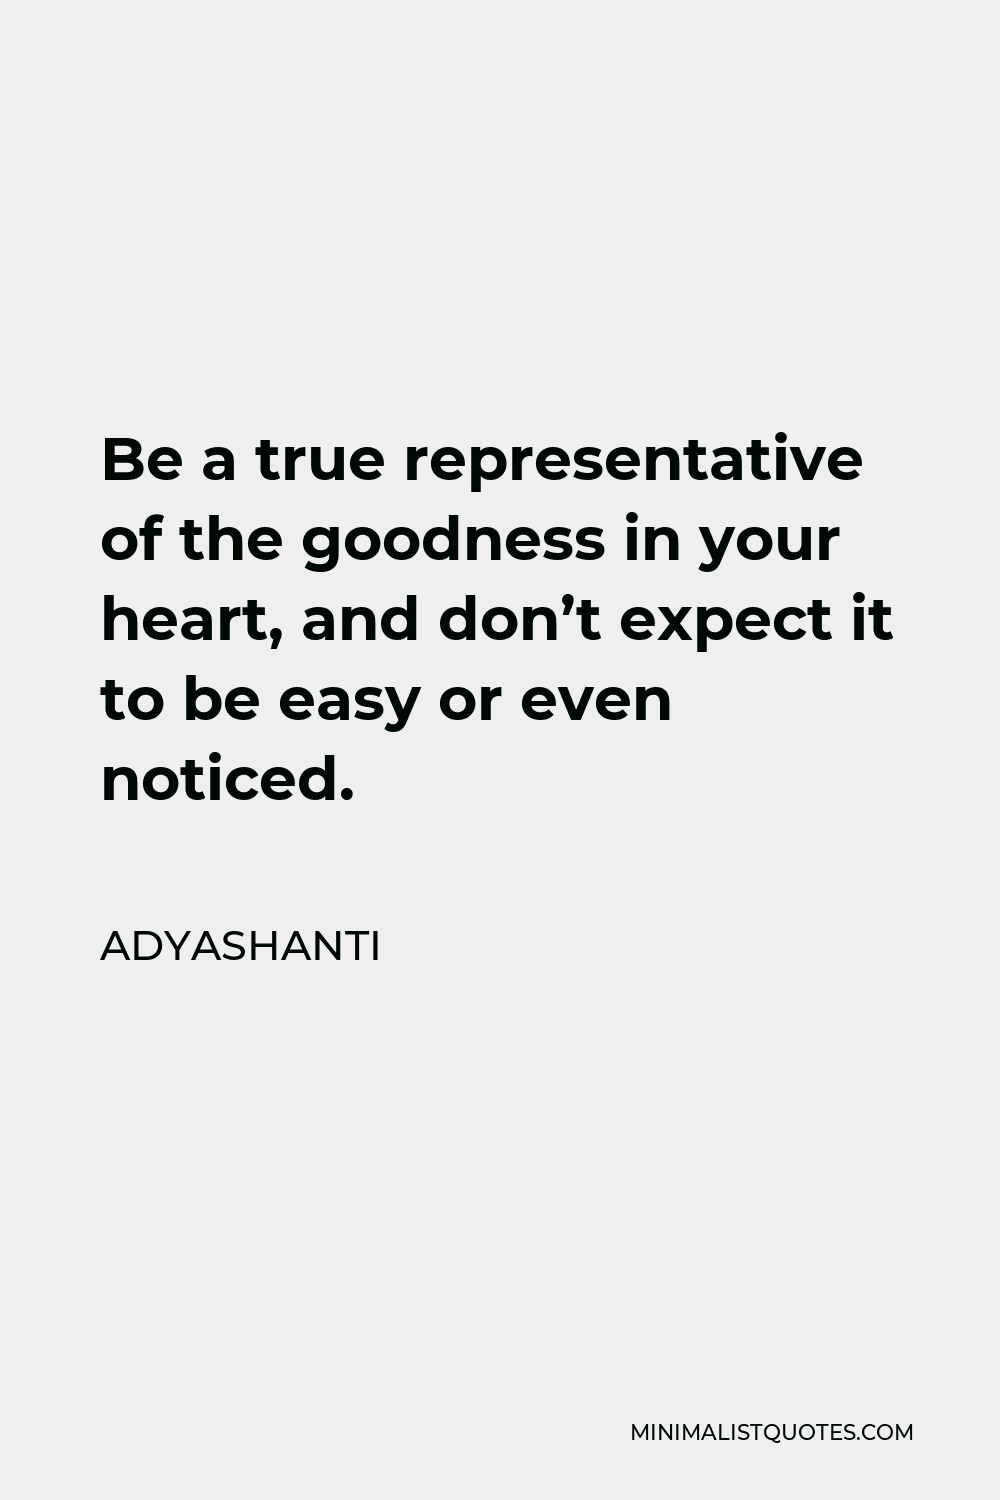 Adyashanti Quote - Be a true representative of the goodness in your heart, and don’t expect it to be easy or even noticed.